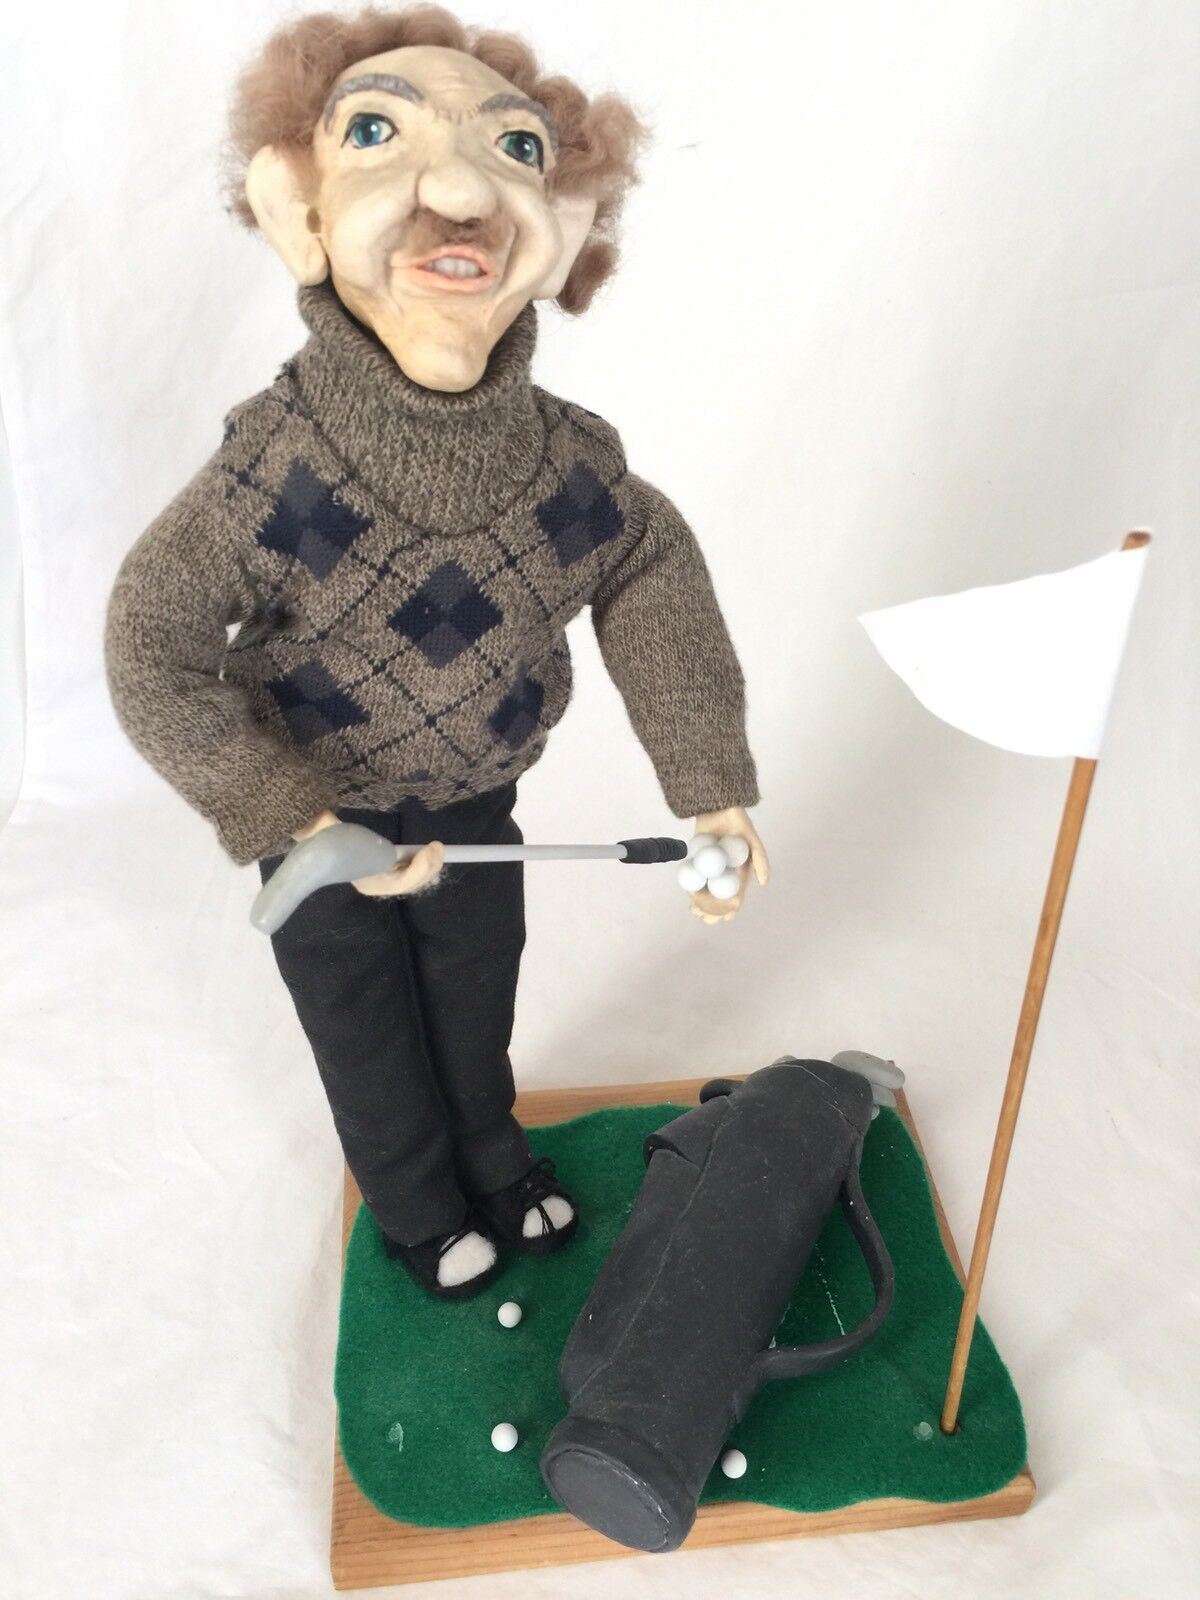 OOAK Sculpted Clay Old Man Golfer Ugly Face Character Figure Figurine